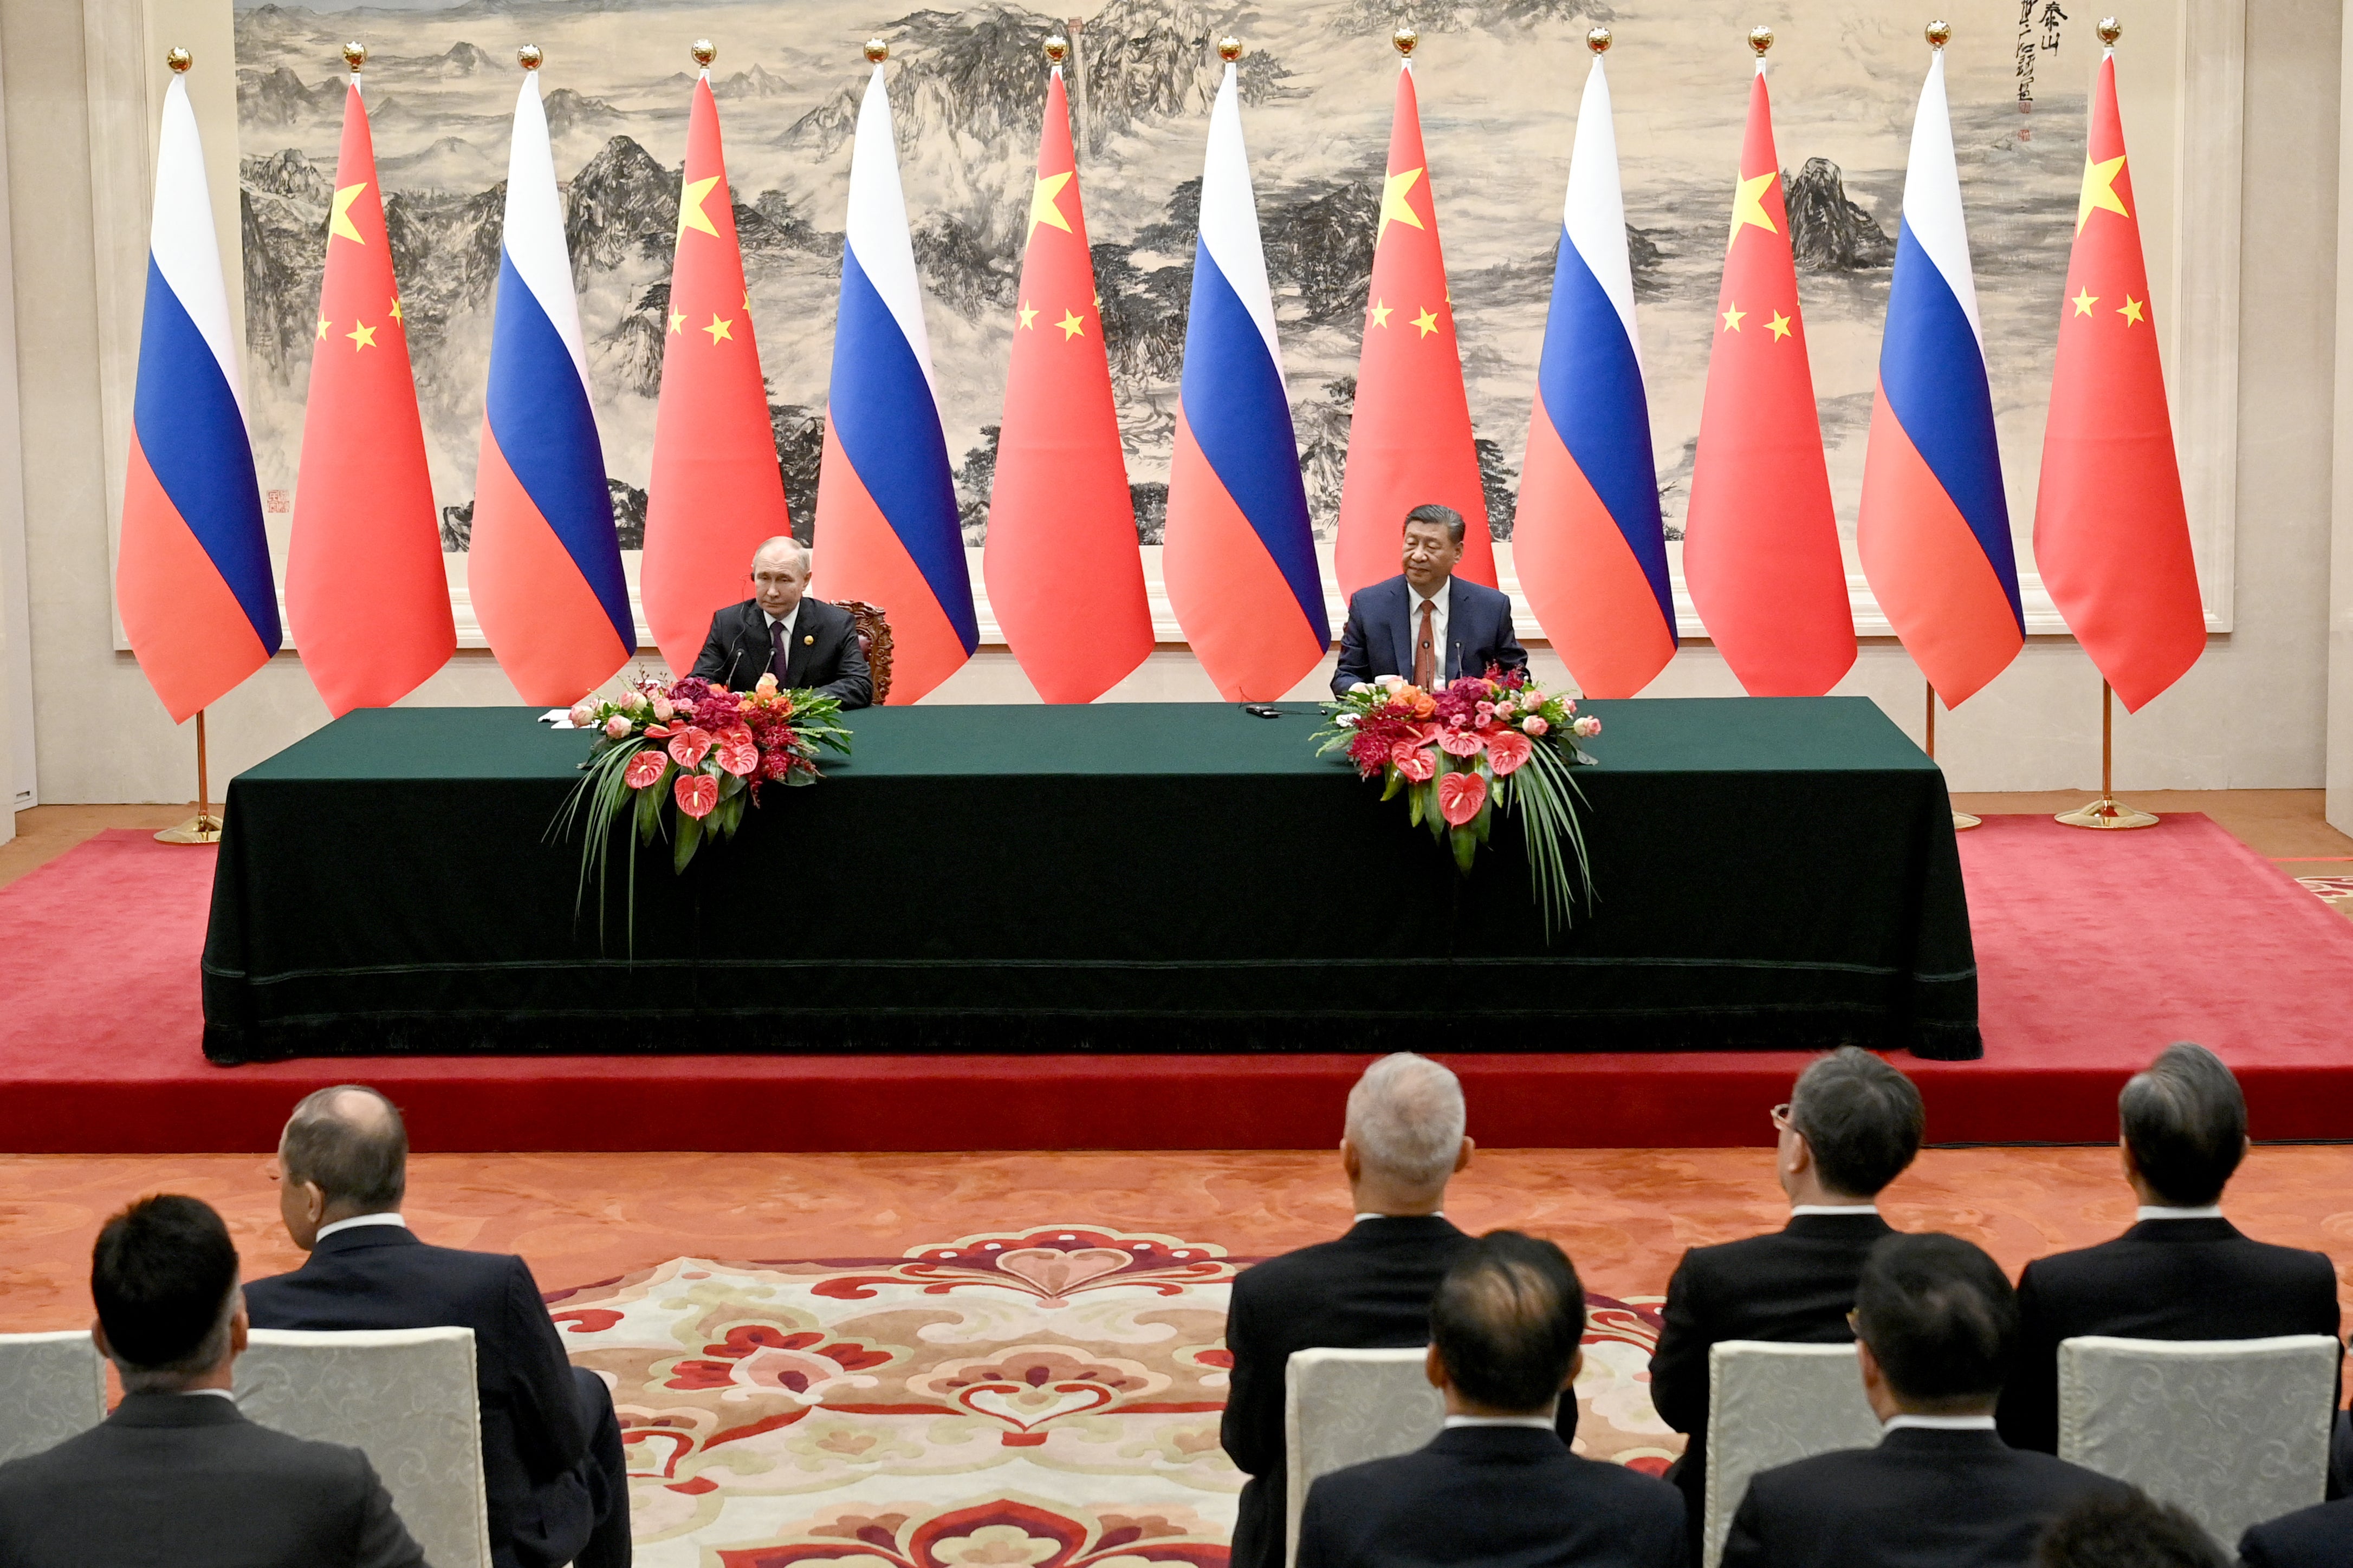 In this pool photograph distributed by the Russian state agency Sputnik, Russia's President Vladimir Putin and China's President Xi Jinping attend a signing ceremony following their talks in Beijing